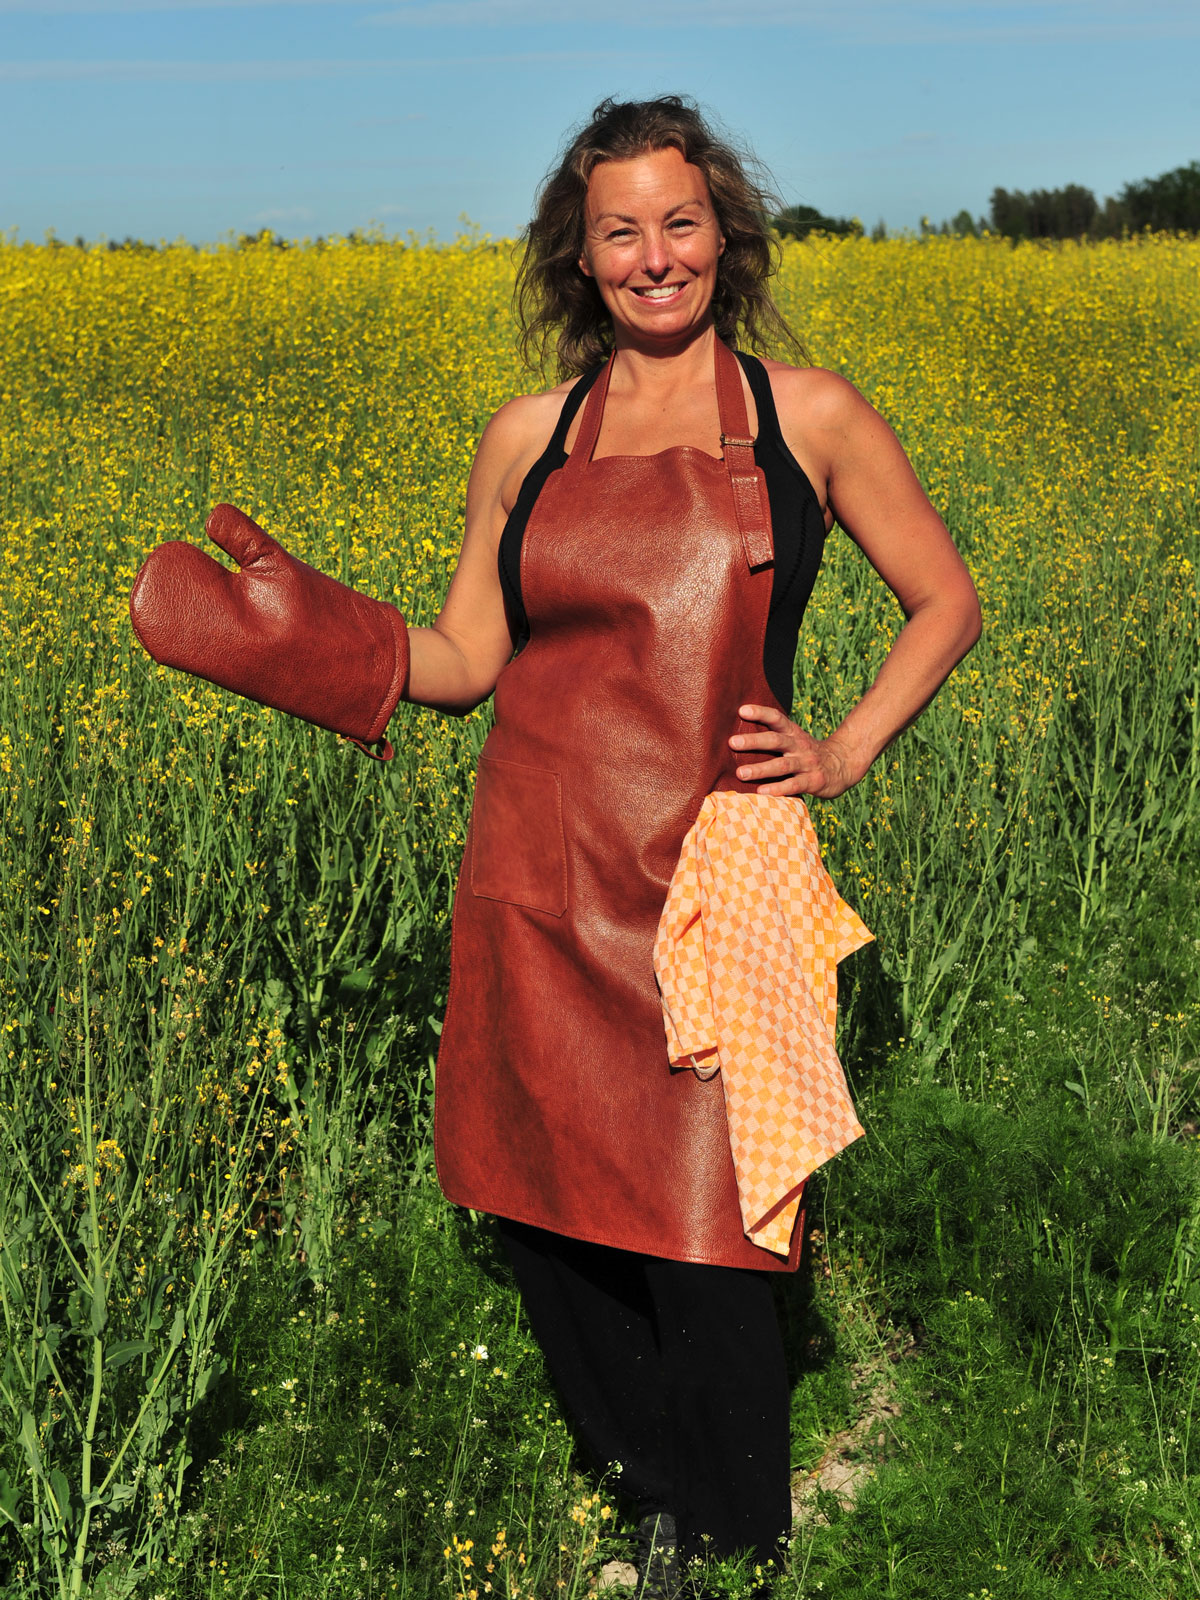 Apron and bbq mitten in leather